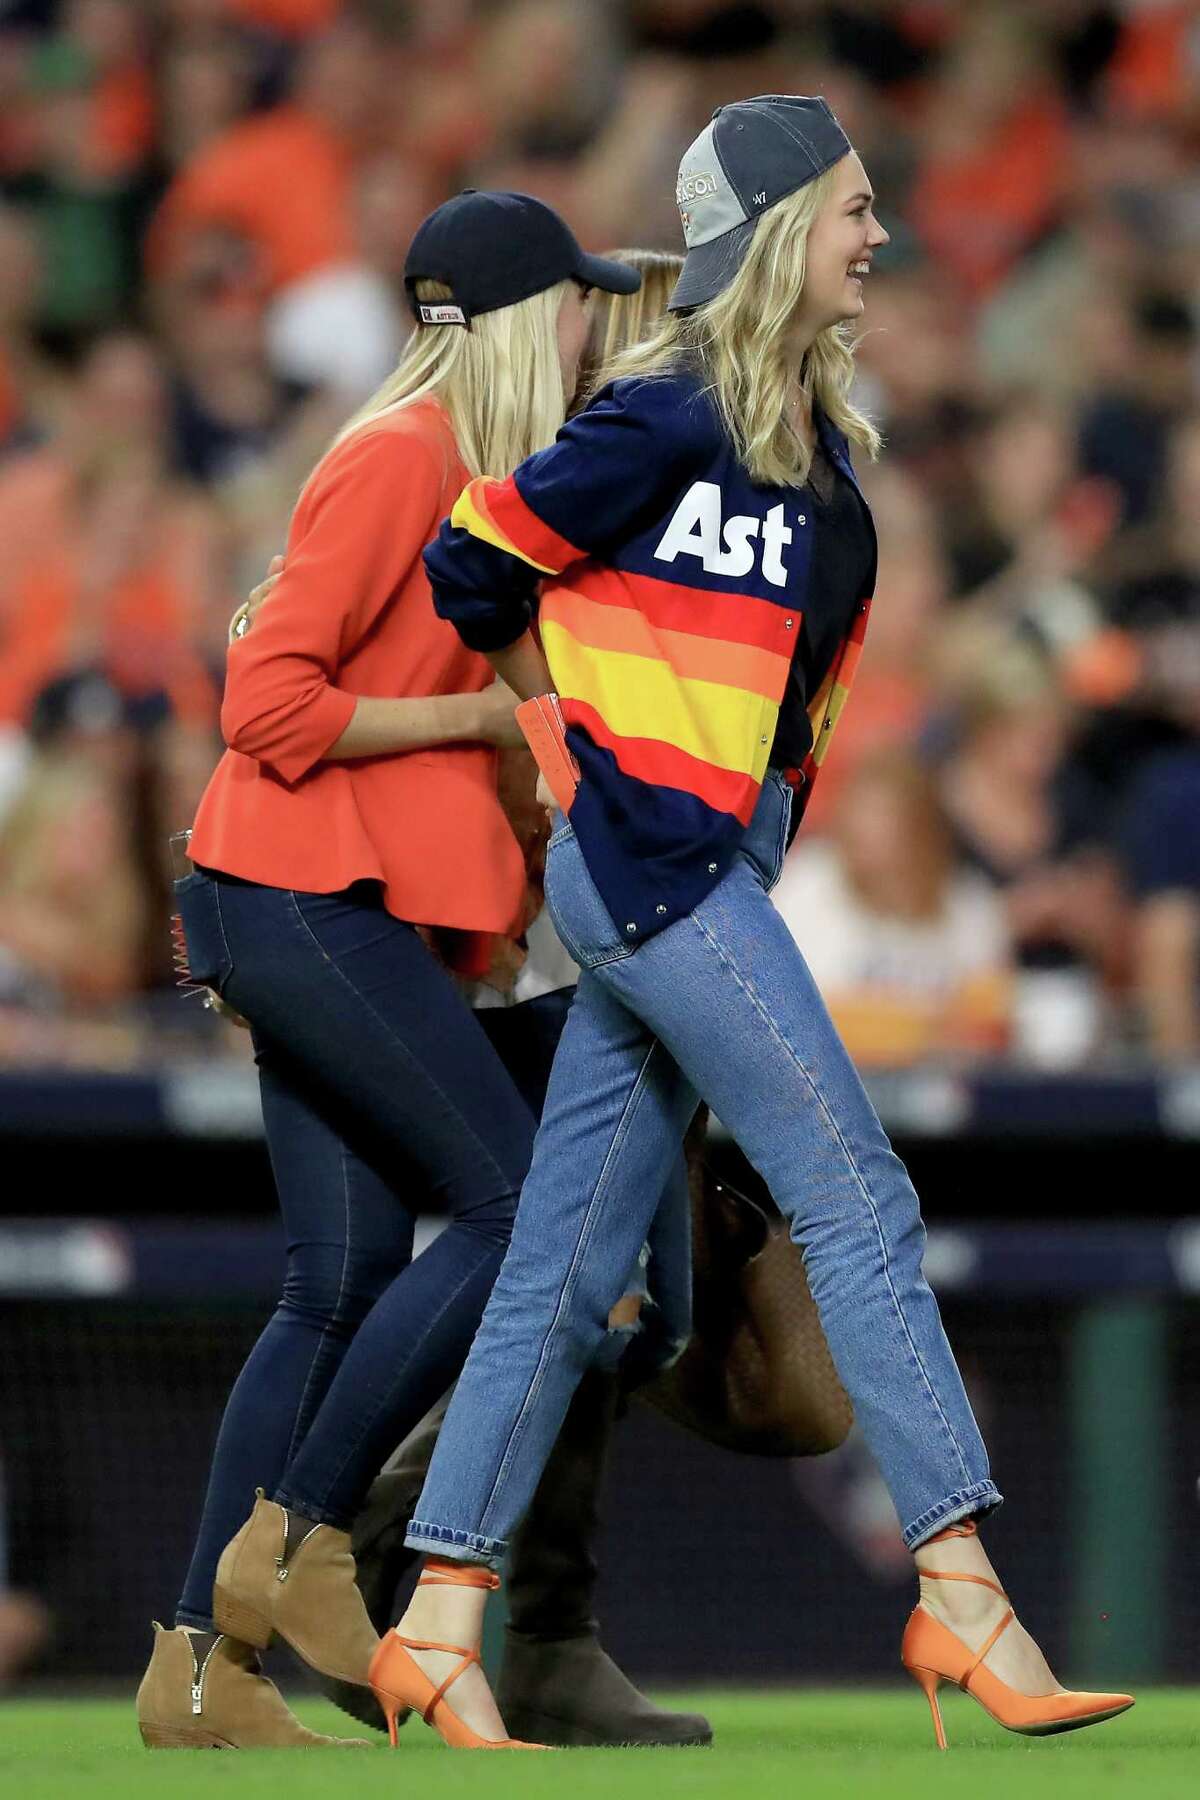 HOUSTON, TX - OCTOBER 21: Model Kate Upton celebrates after the Houston Astros defeated the New York Yankees by a score of 4-0 to win Game Seven of the American League Championship Series at Minute Maid Park on October 21, 2017 in Houston, Texas. The Houston Astros advance to face the Los Angeles Dodgers in the World Series. (Photo by Ronald Martinez/Getty Images)